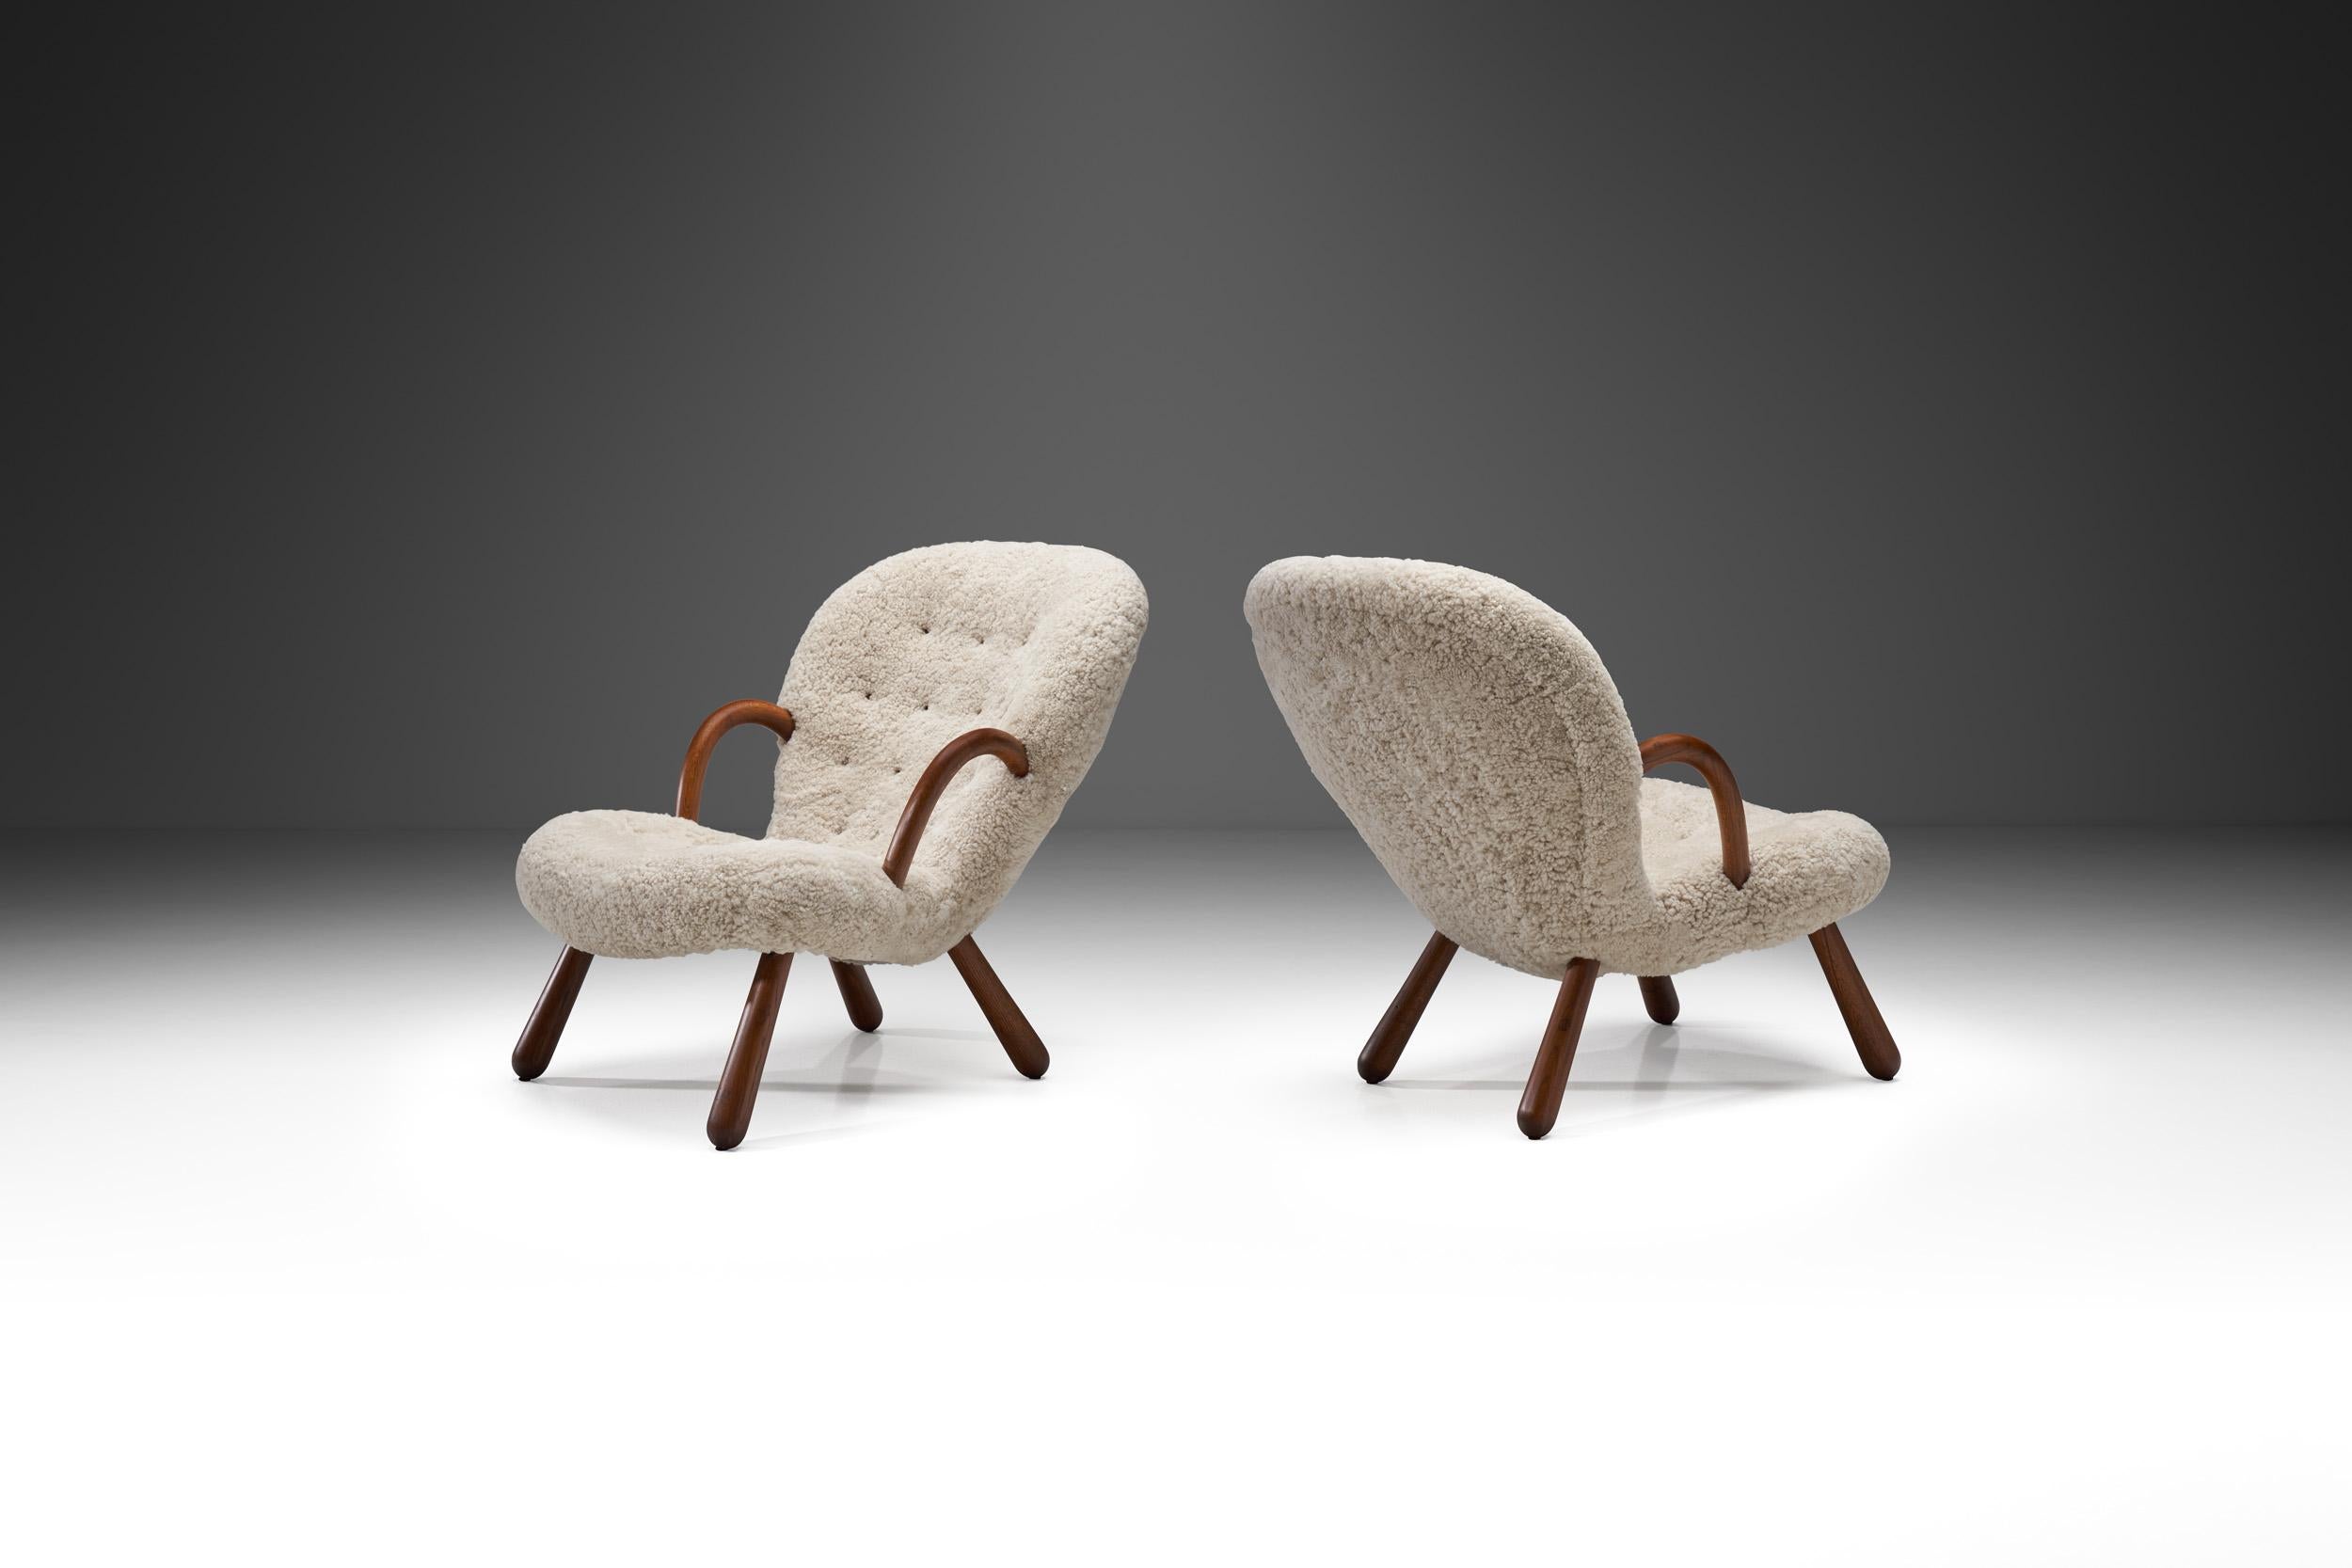 These “Clam” chairs have a beloved design, thanks to which it is considered by many as one of the most attractive chairs of Nordic Design. At the same time, these chairs are arguably also the most mysterious piece on the Danish furniture